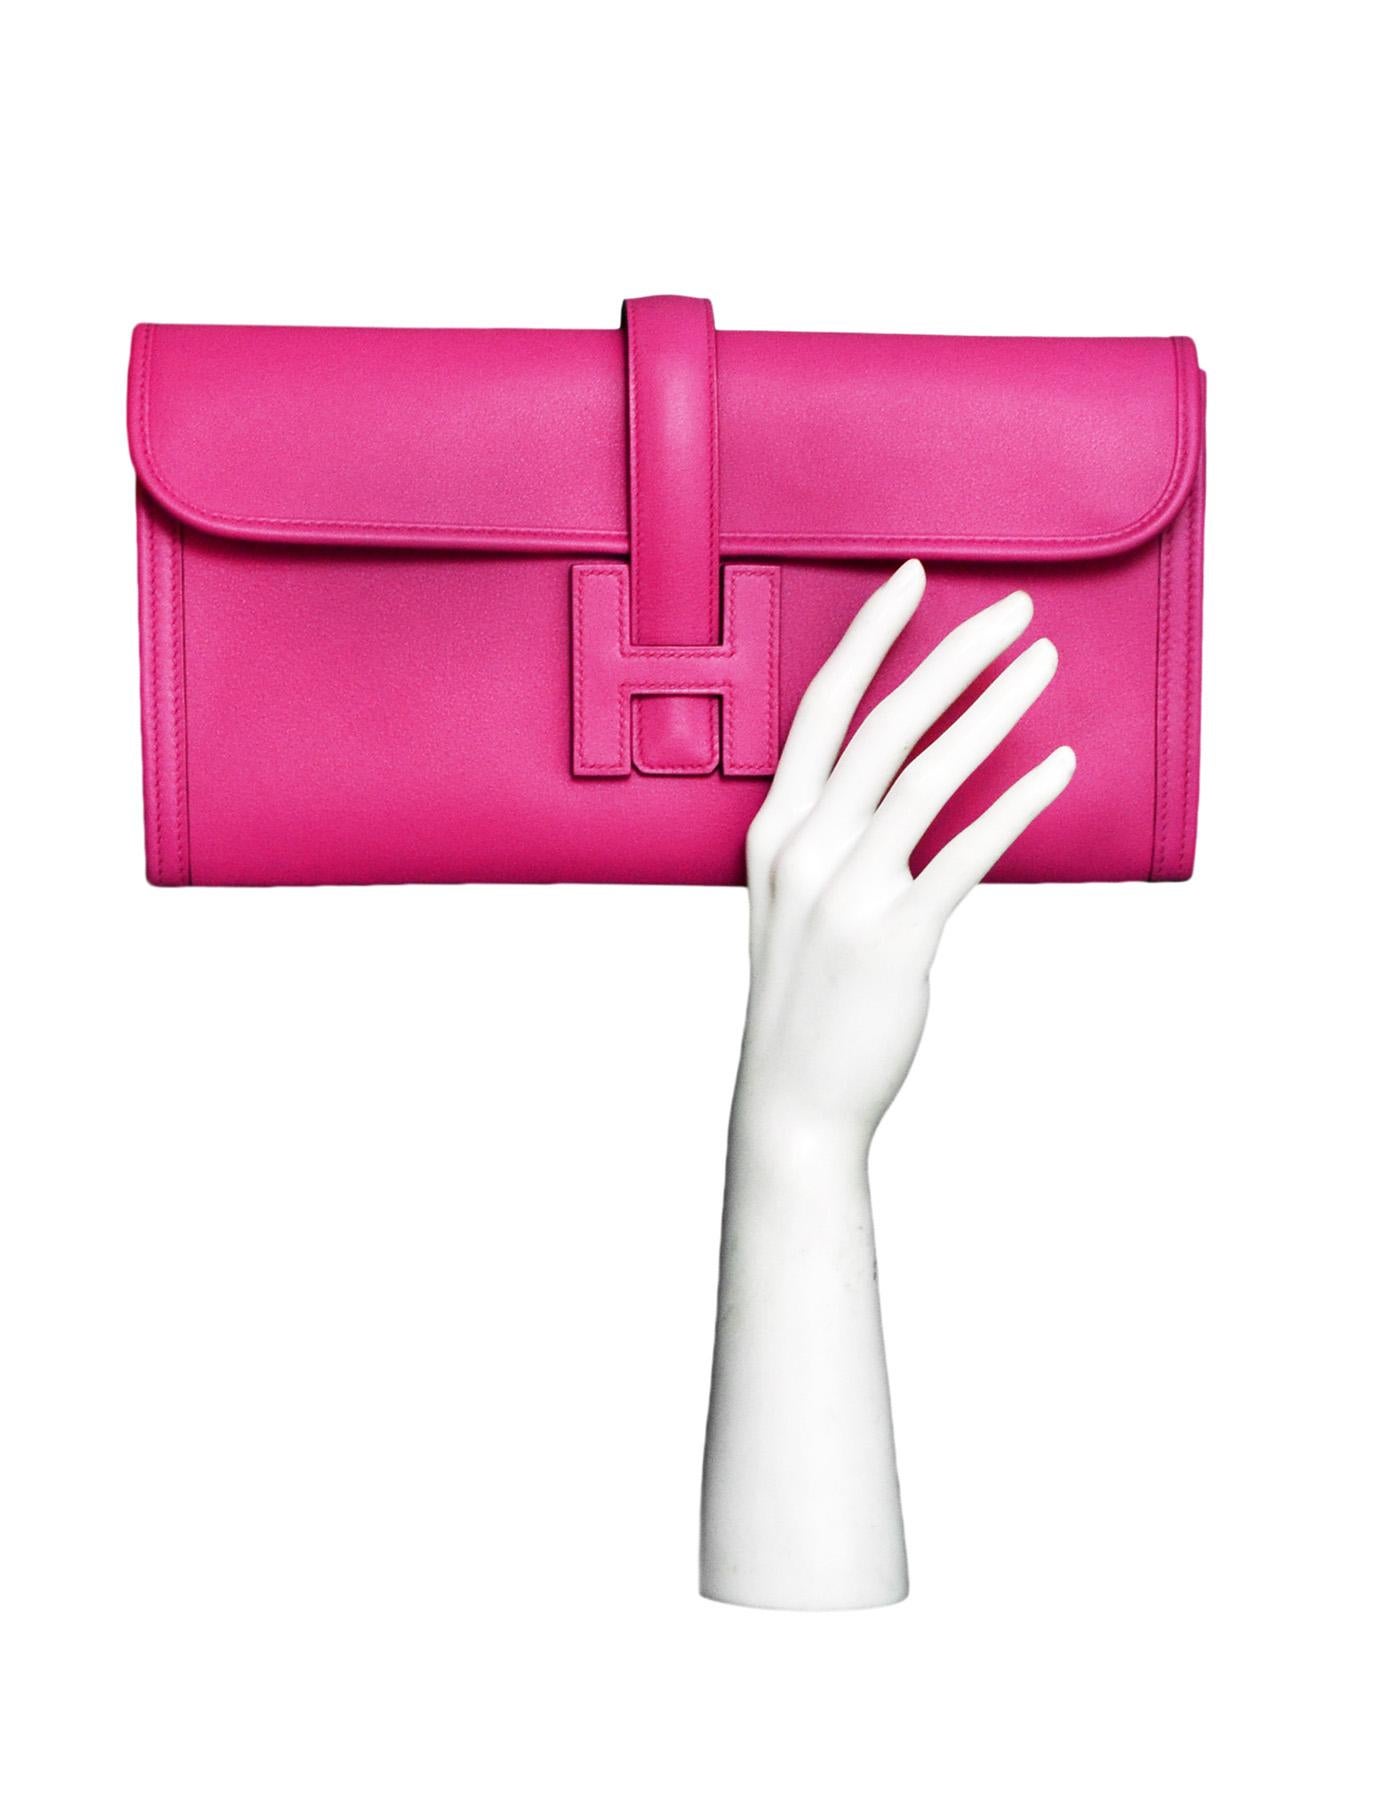 Hermes Magnolia Pink Swift Leather Jige Elan 29 Clutch Bag

Made In: France
Year of Production: 2018 (C stamp)
Color: Magnolia pink
Materials: Swift leather 
Lining: Pink leather
Closure/Opening: Flap top with slide through H tab
Exterior Pockets: